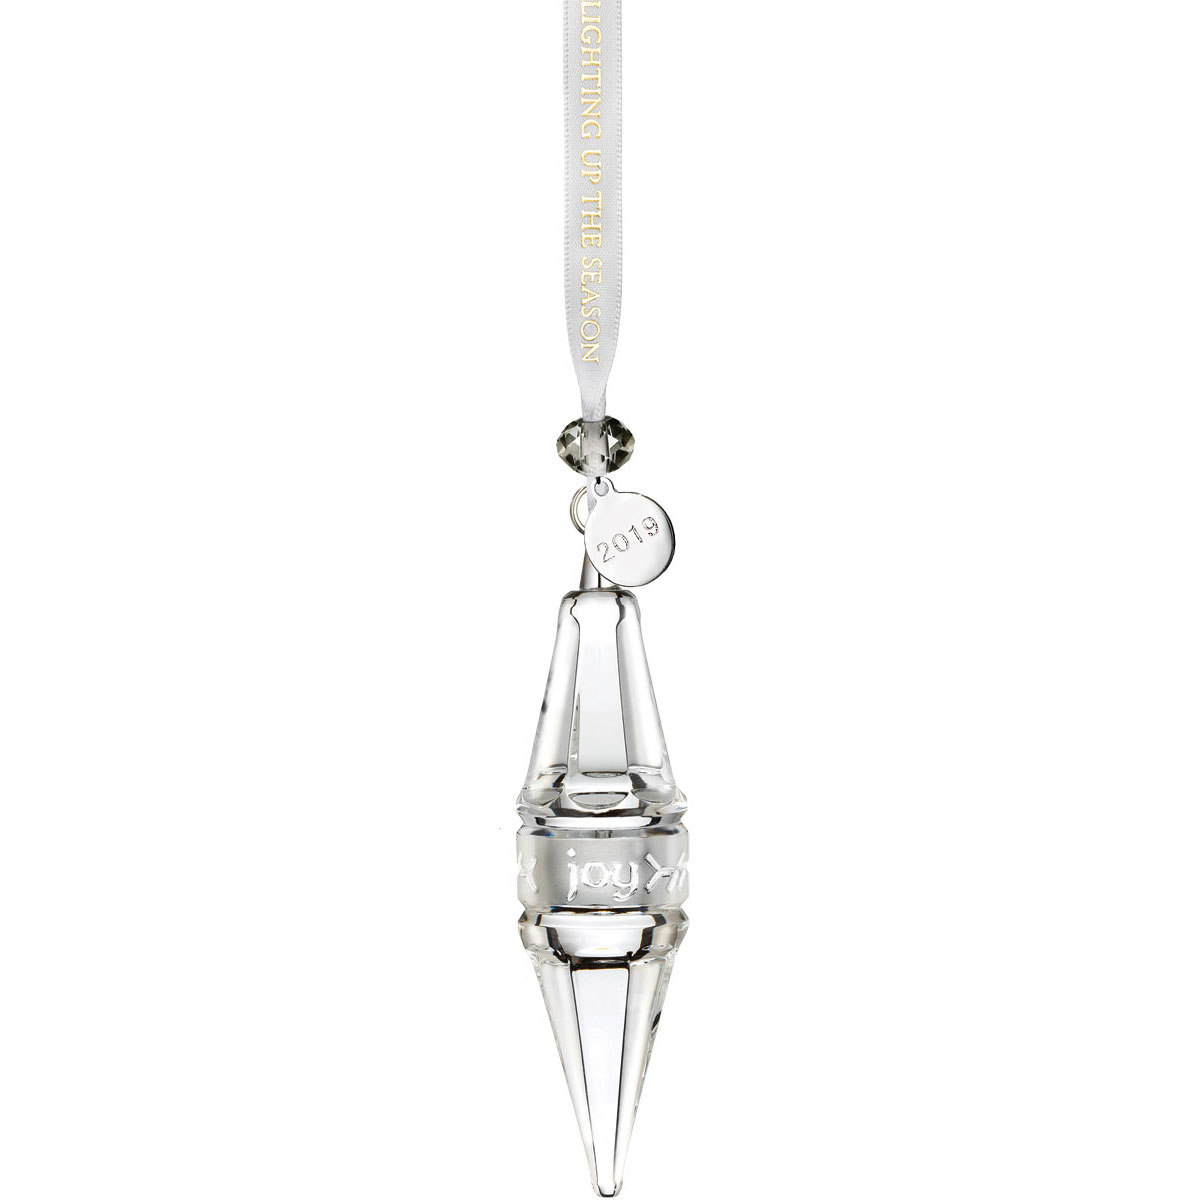 Waterford Crystal 2019 Ogham Joy Icicle Ornament